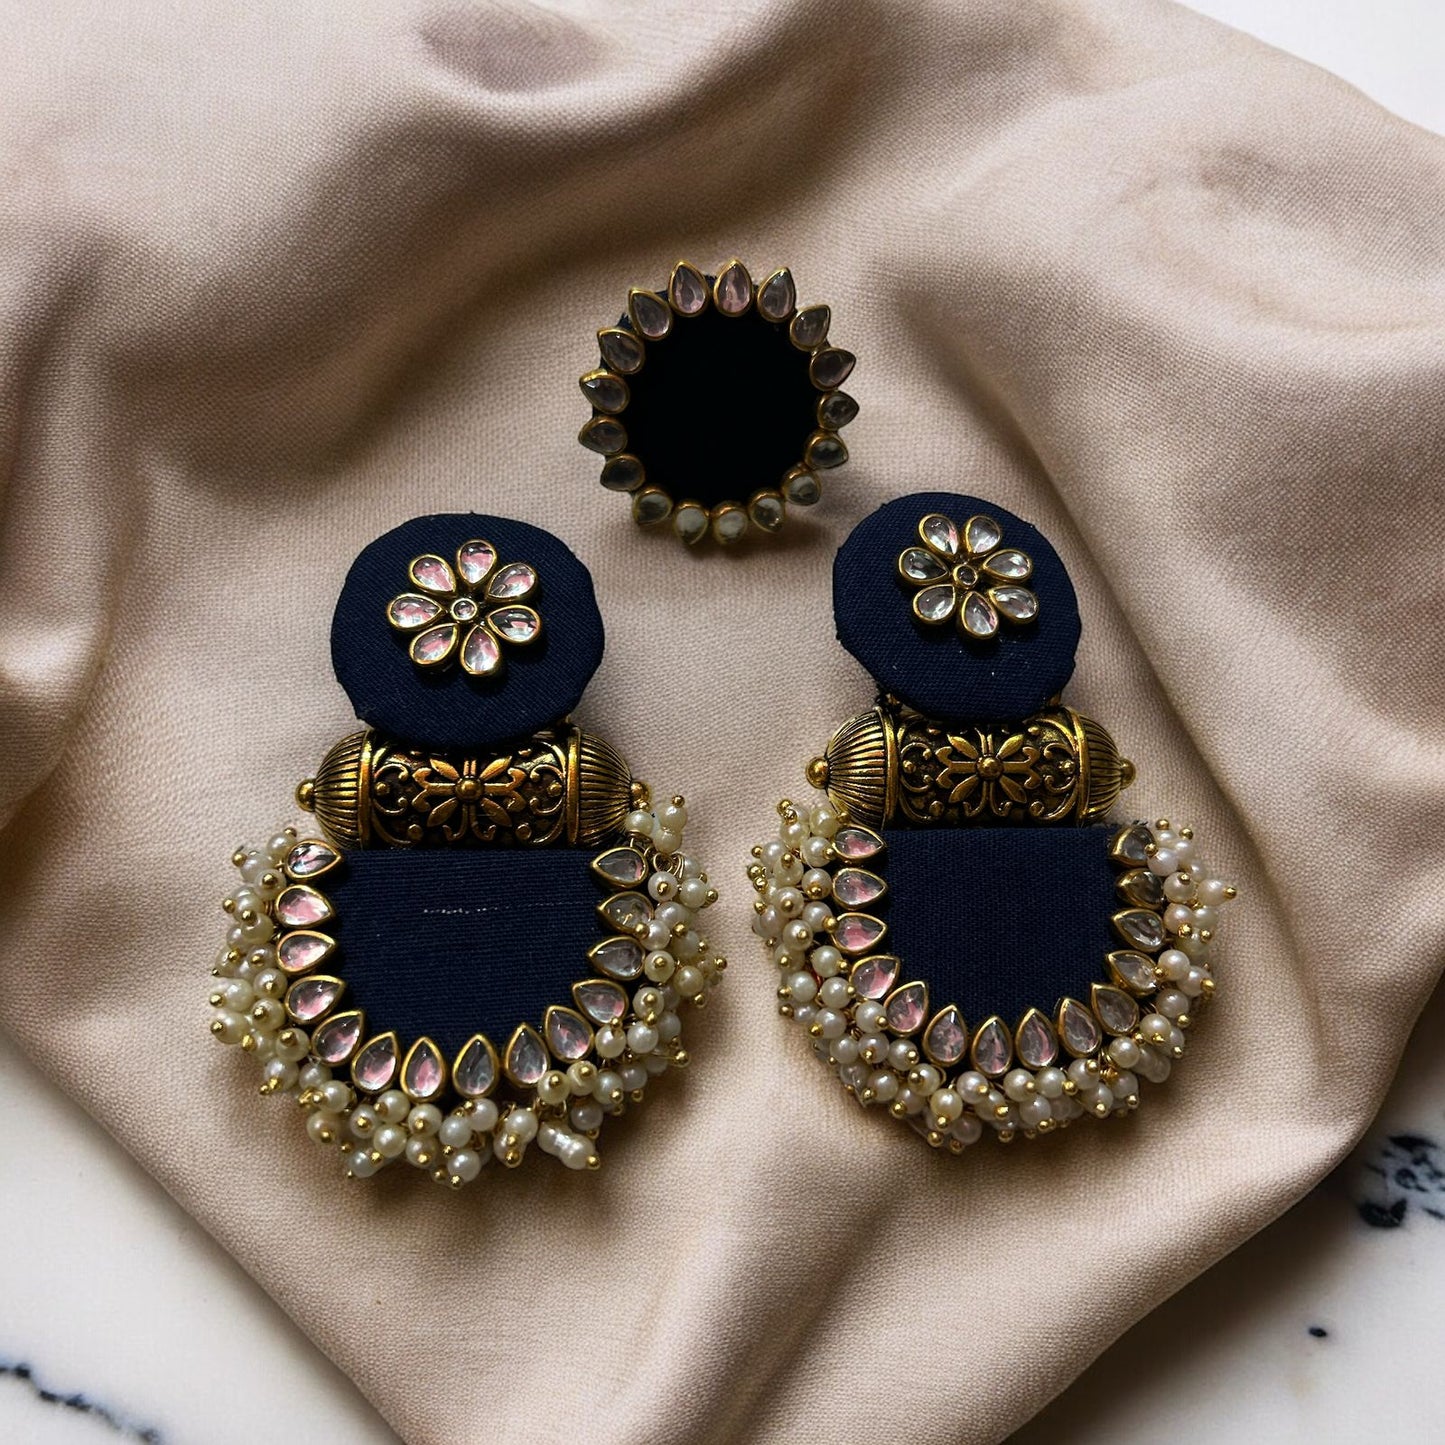 Ethinic earring and ring set on fabric with accessories blue